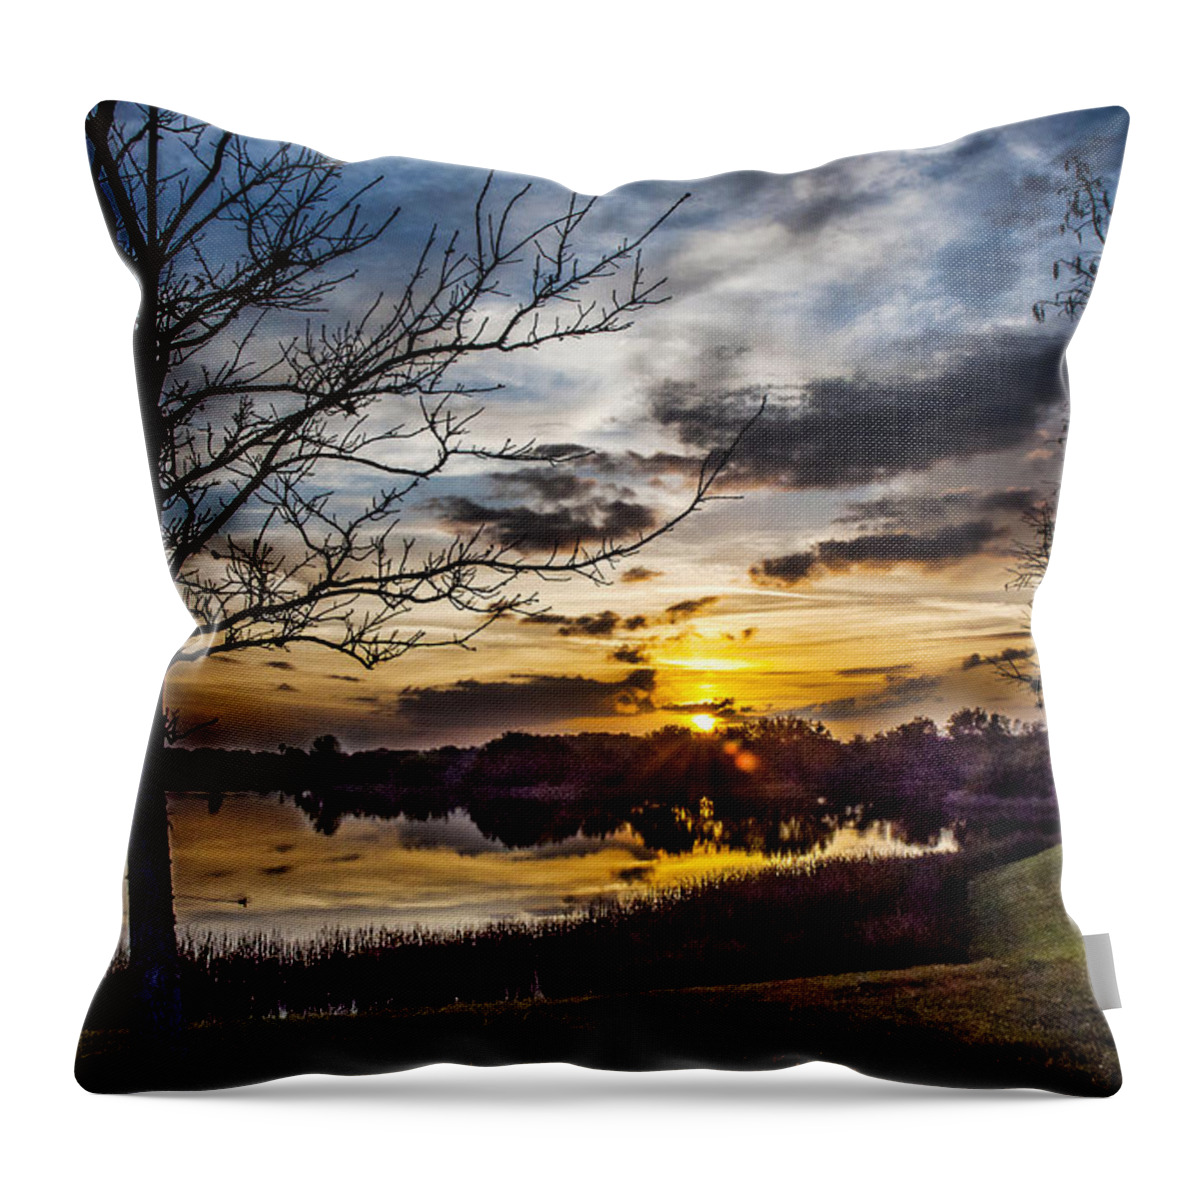 Sunrise Throw Pillow featuring the photograph The Dawn Awakens by Norman Johnson